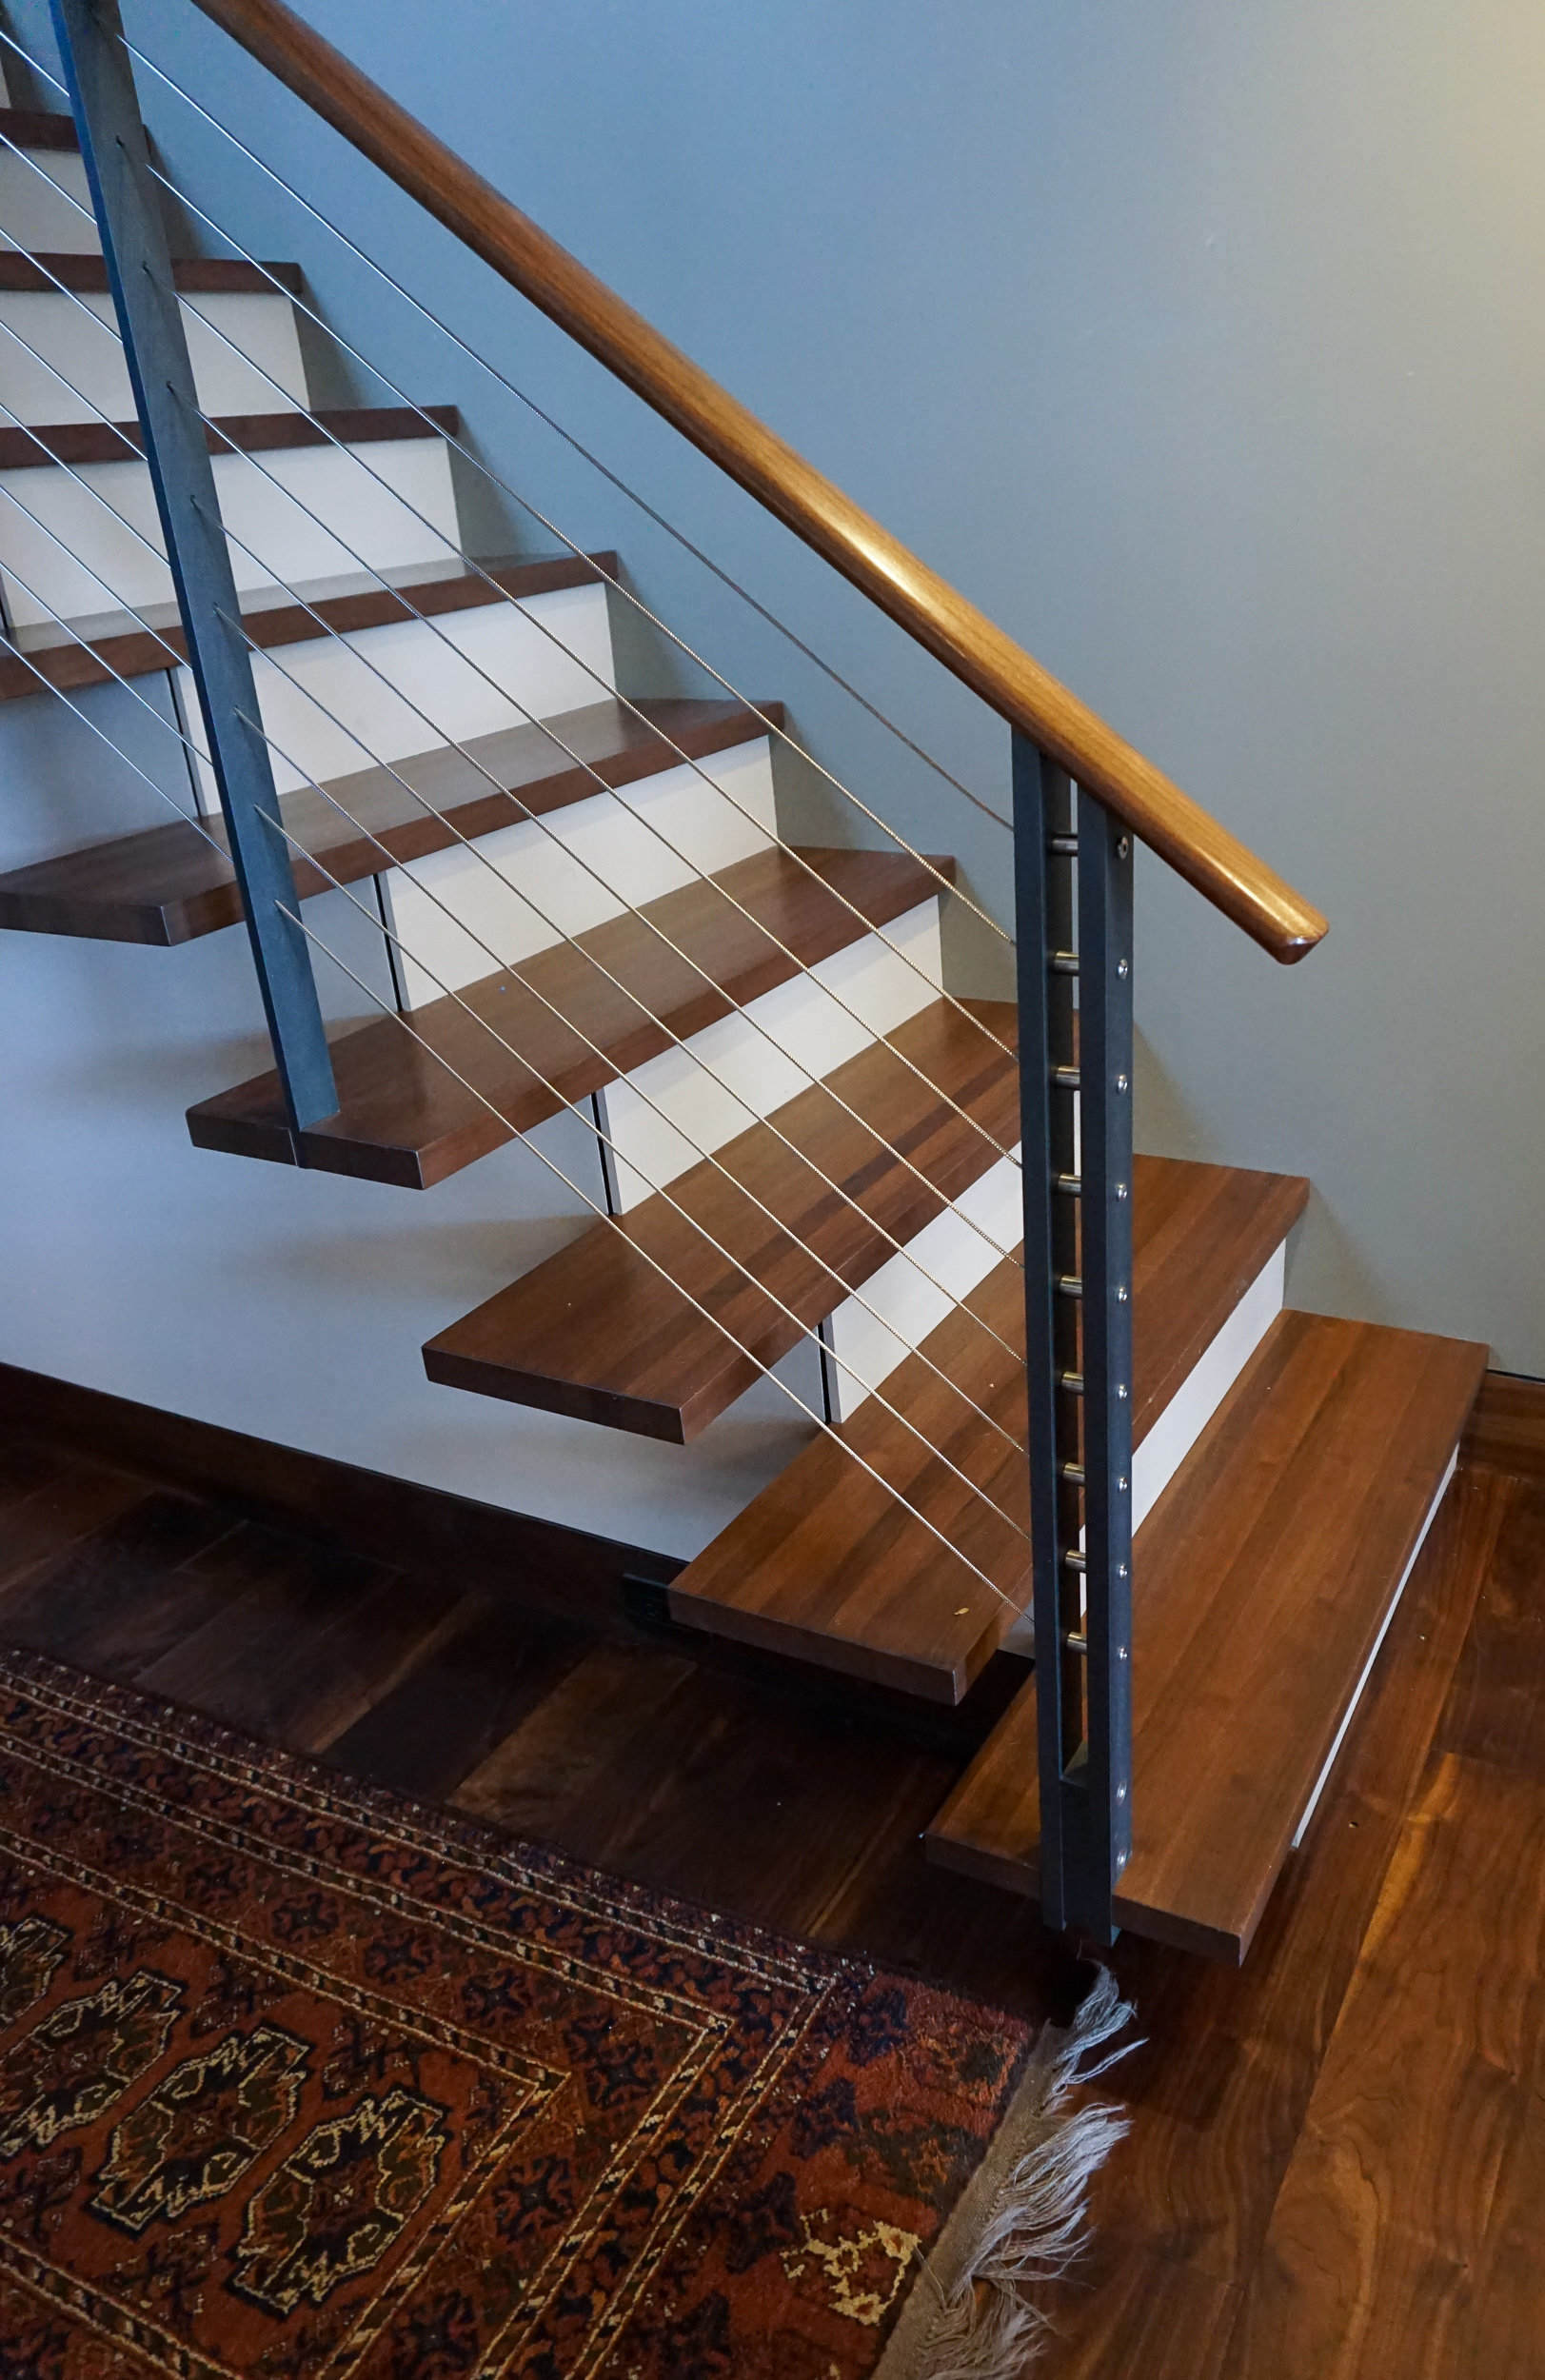 Custom staircase railing posts with double-support and stainless steels spacers